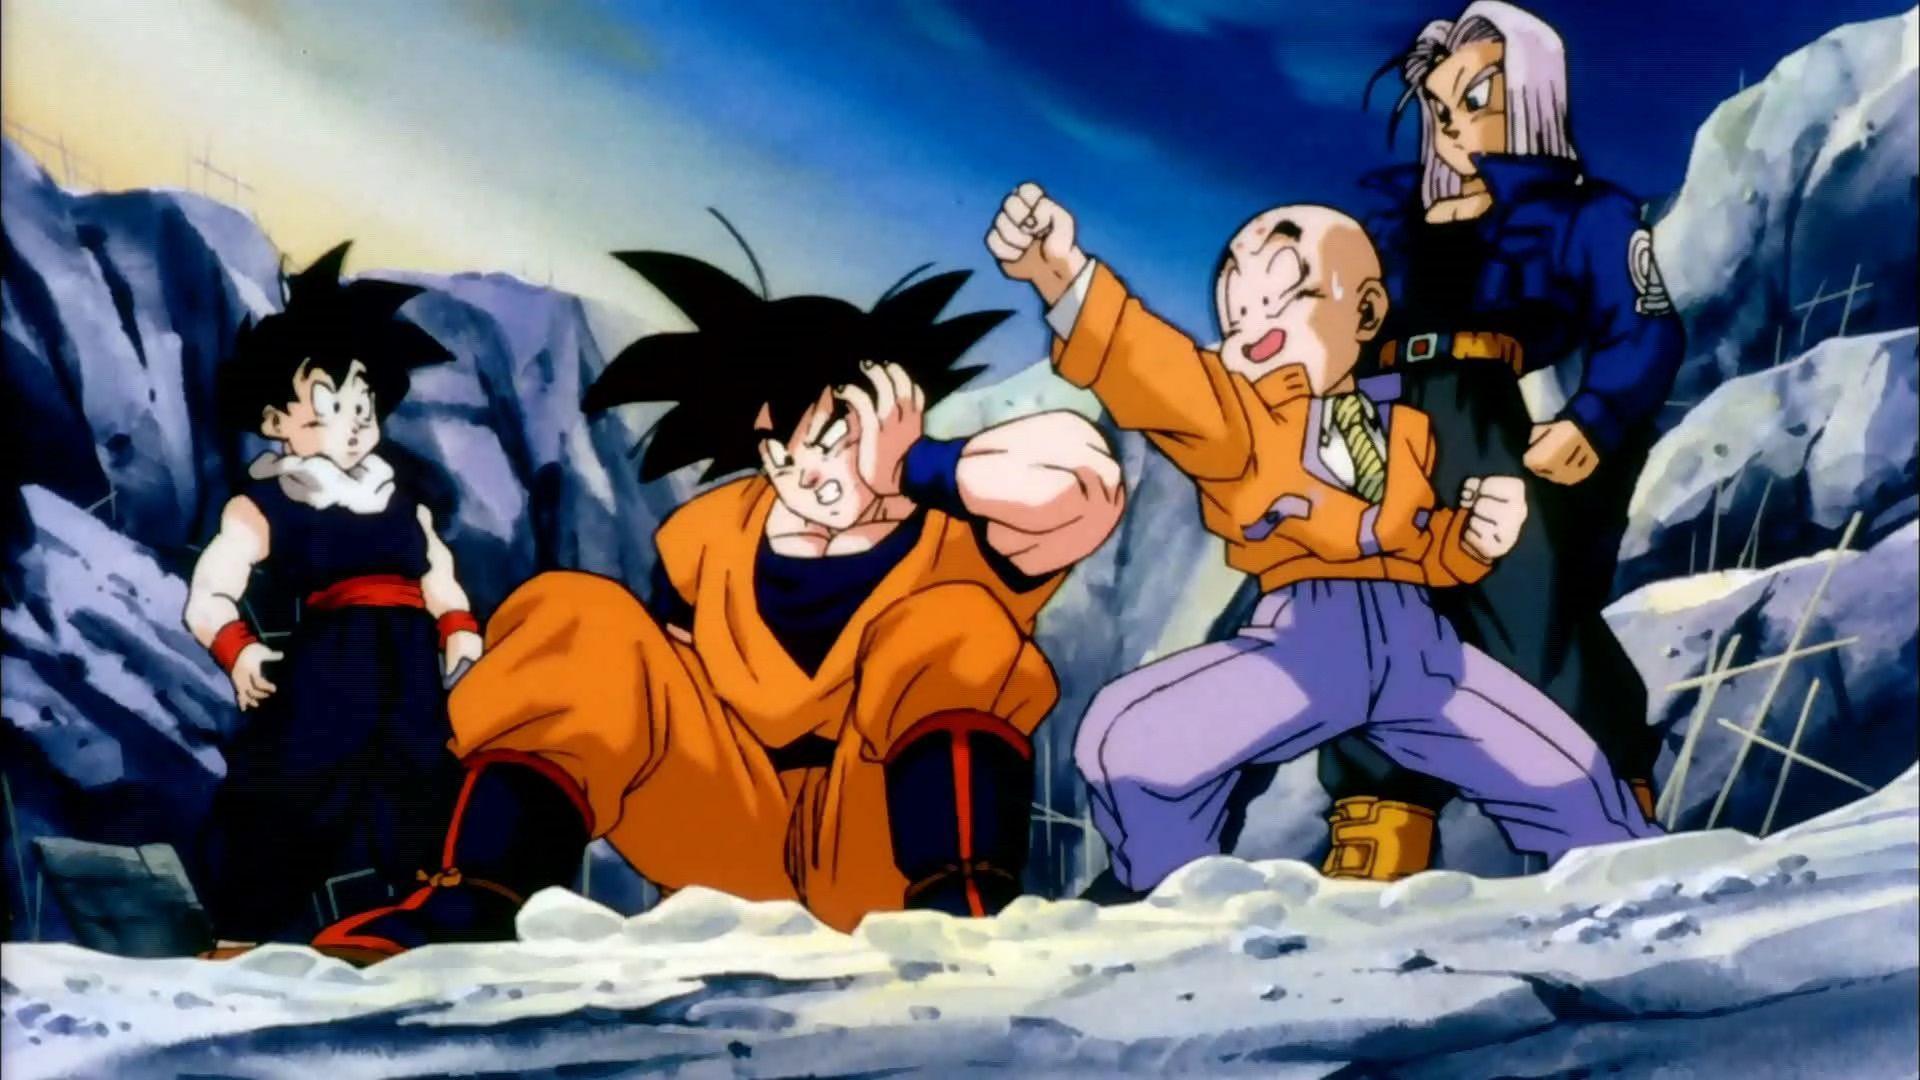 Krillin dragon ball and everything Place of fun!